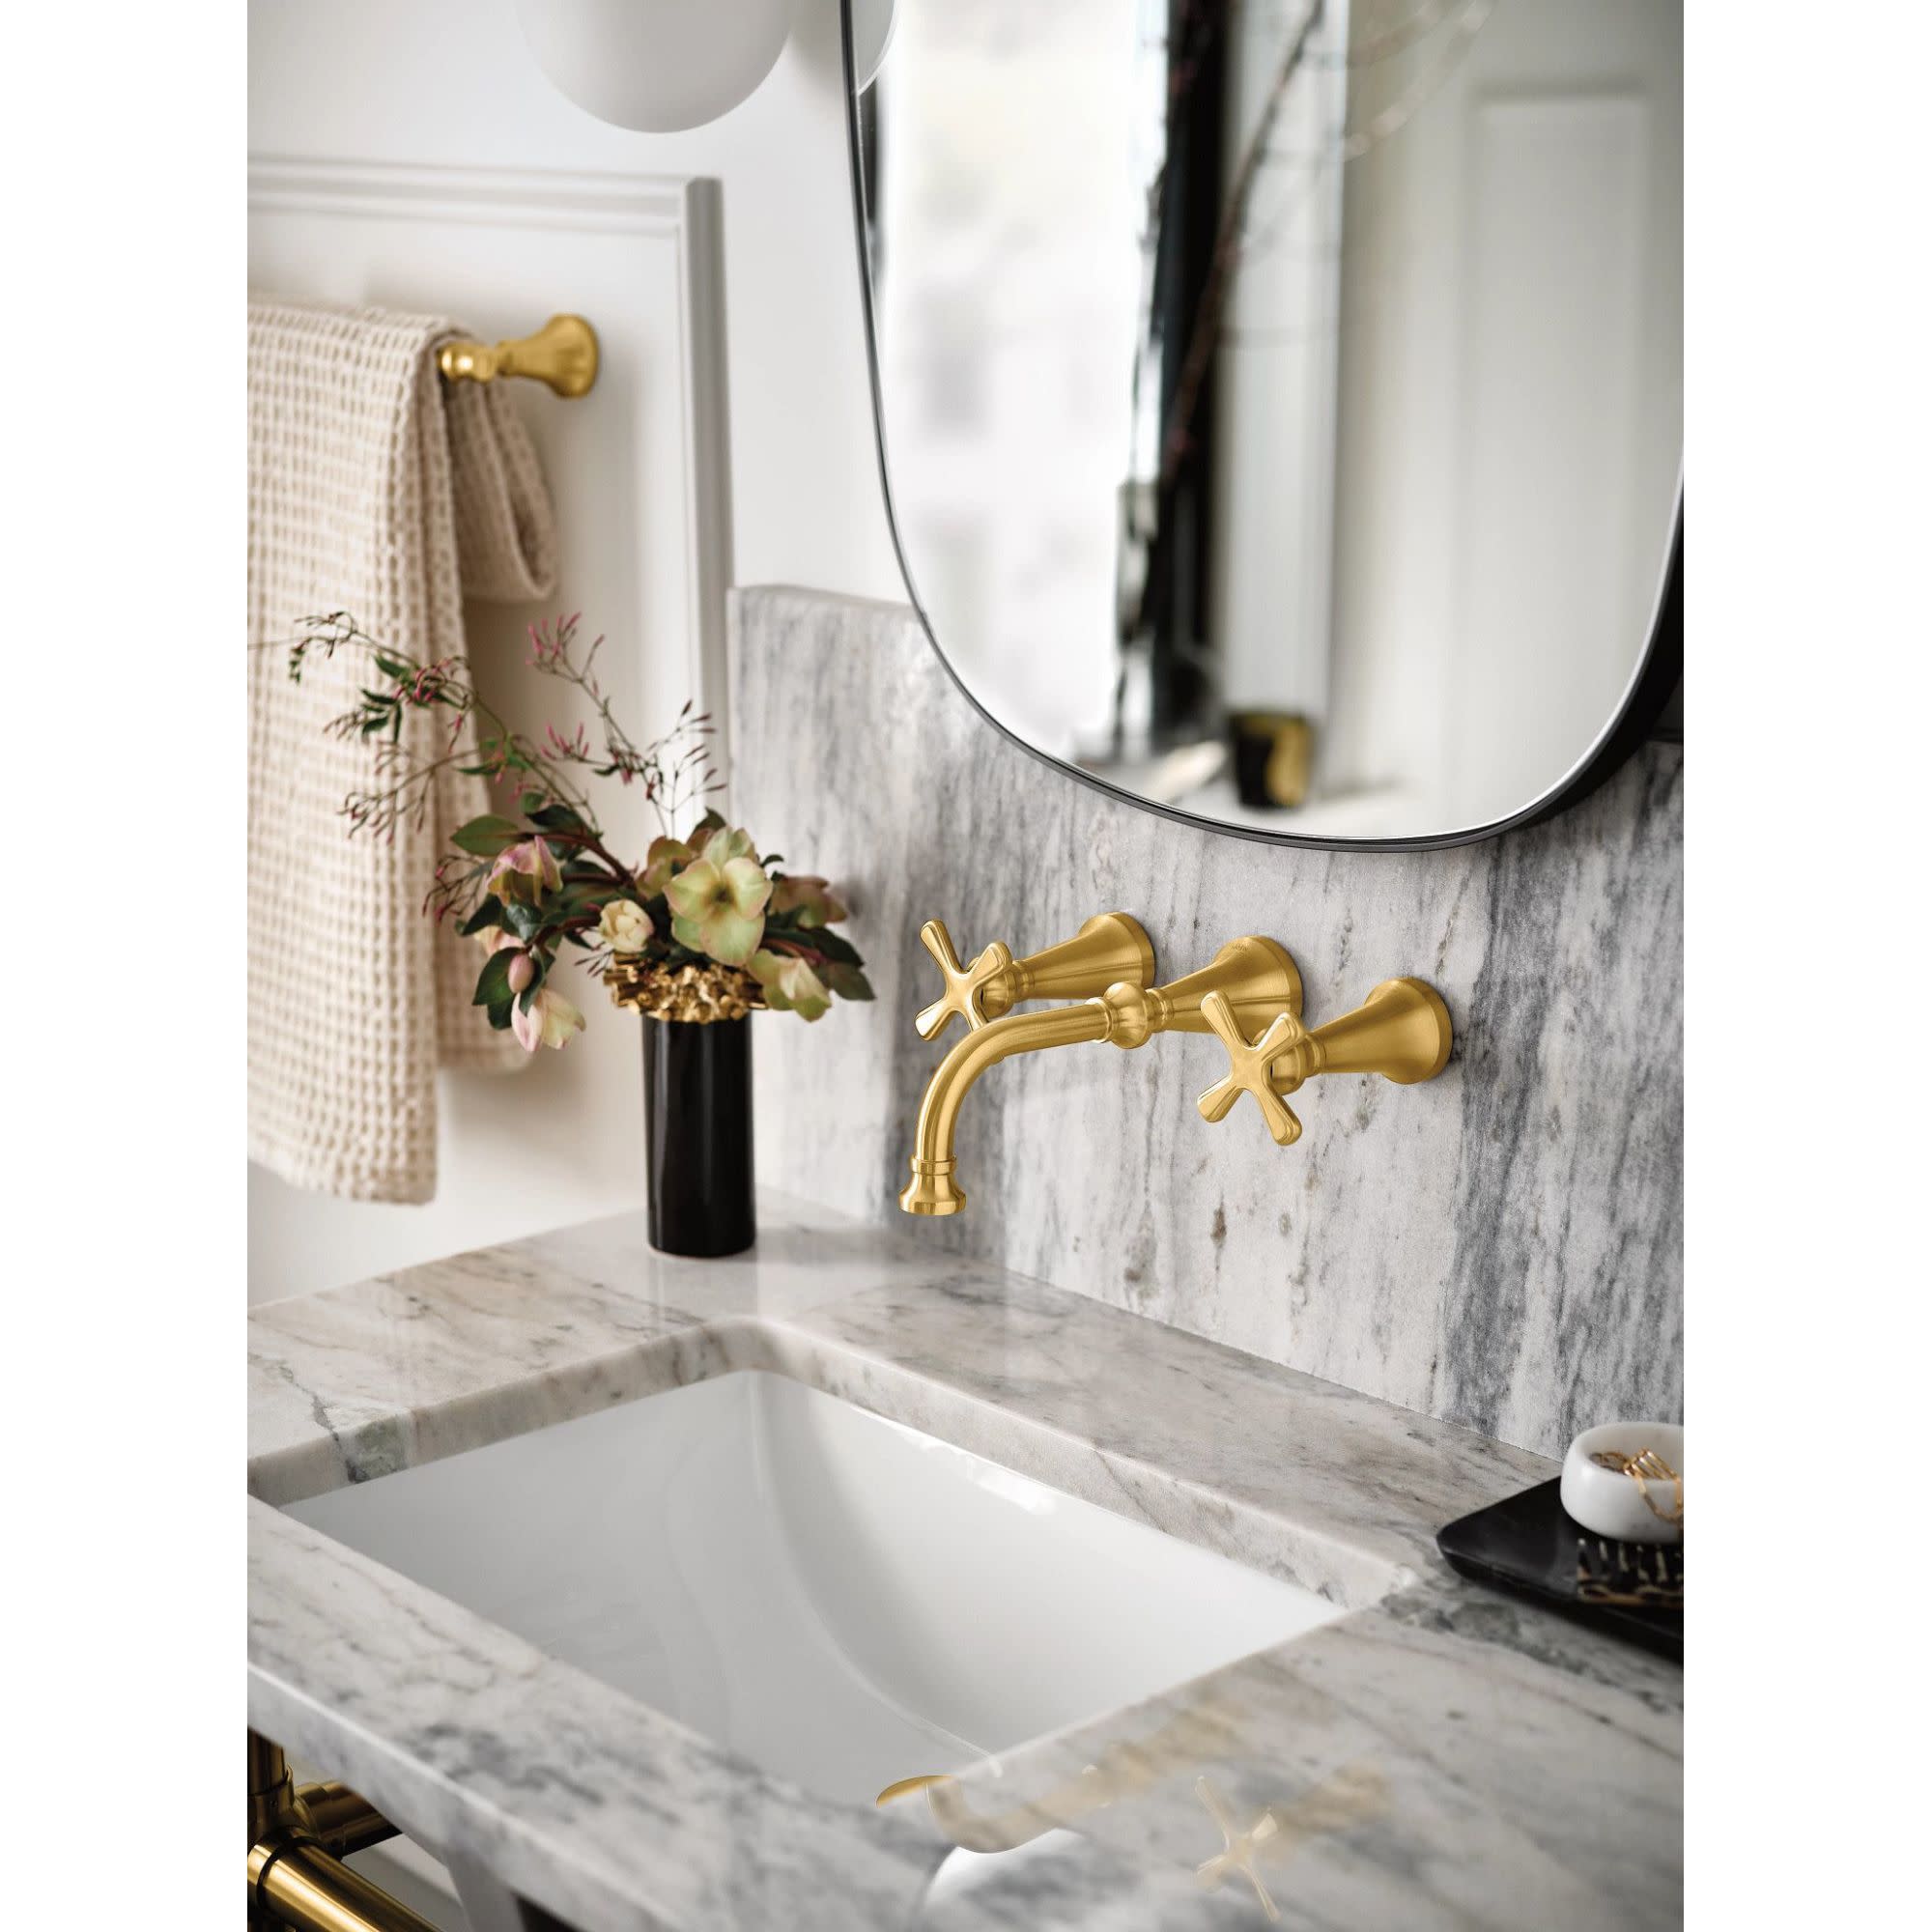 Moen Ts44105 Colinet 1.2 GPM Wall Mounted Widespread Bathroom Faucet - Gold - image 5 of 7